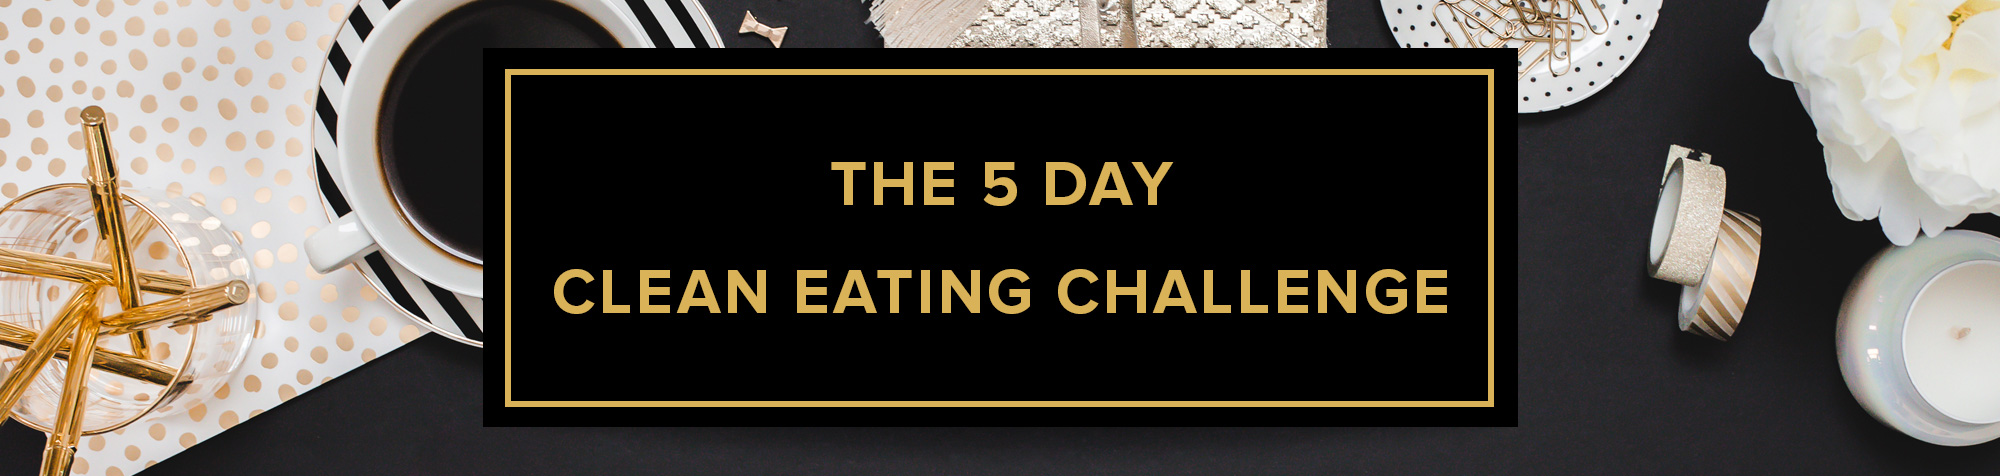 5 Day Clean Eating Challenge